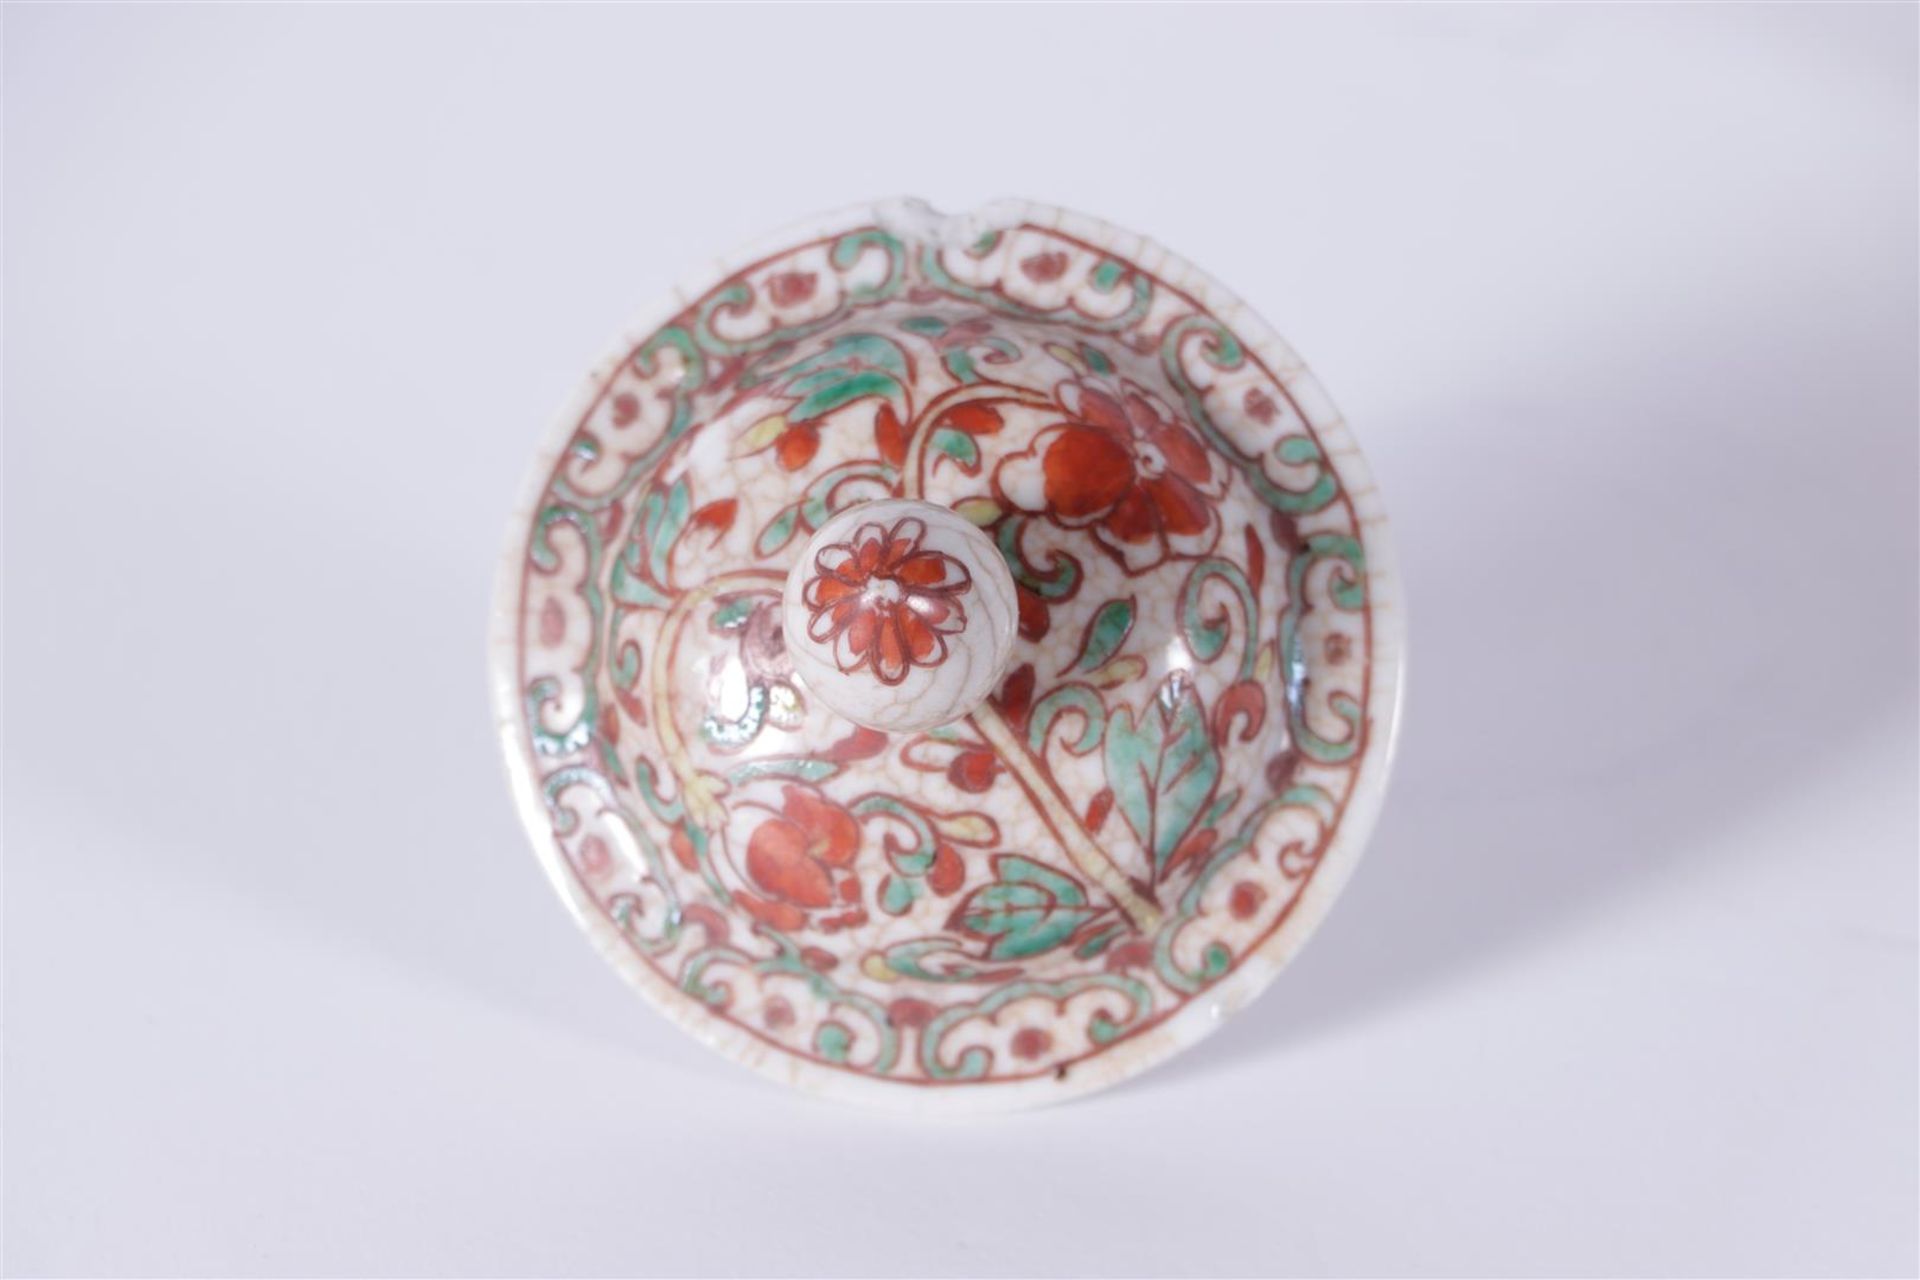 A porcelain lidded jar with floral decor, marked Kangxi. China, 19th century.
H. 25 cm. - Image 4 of 5